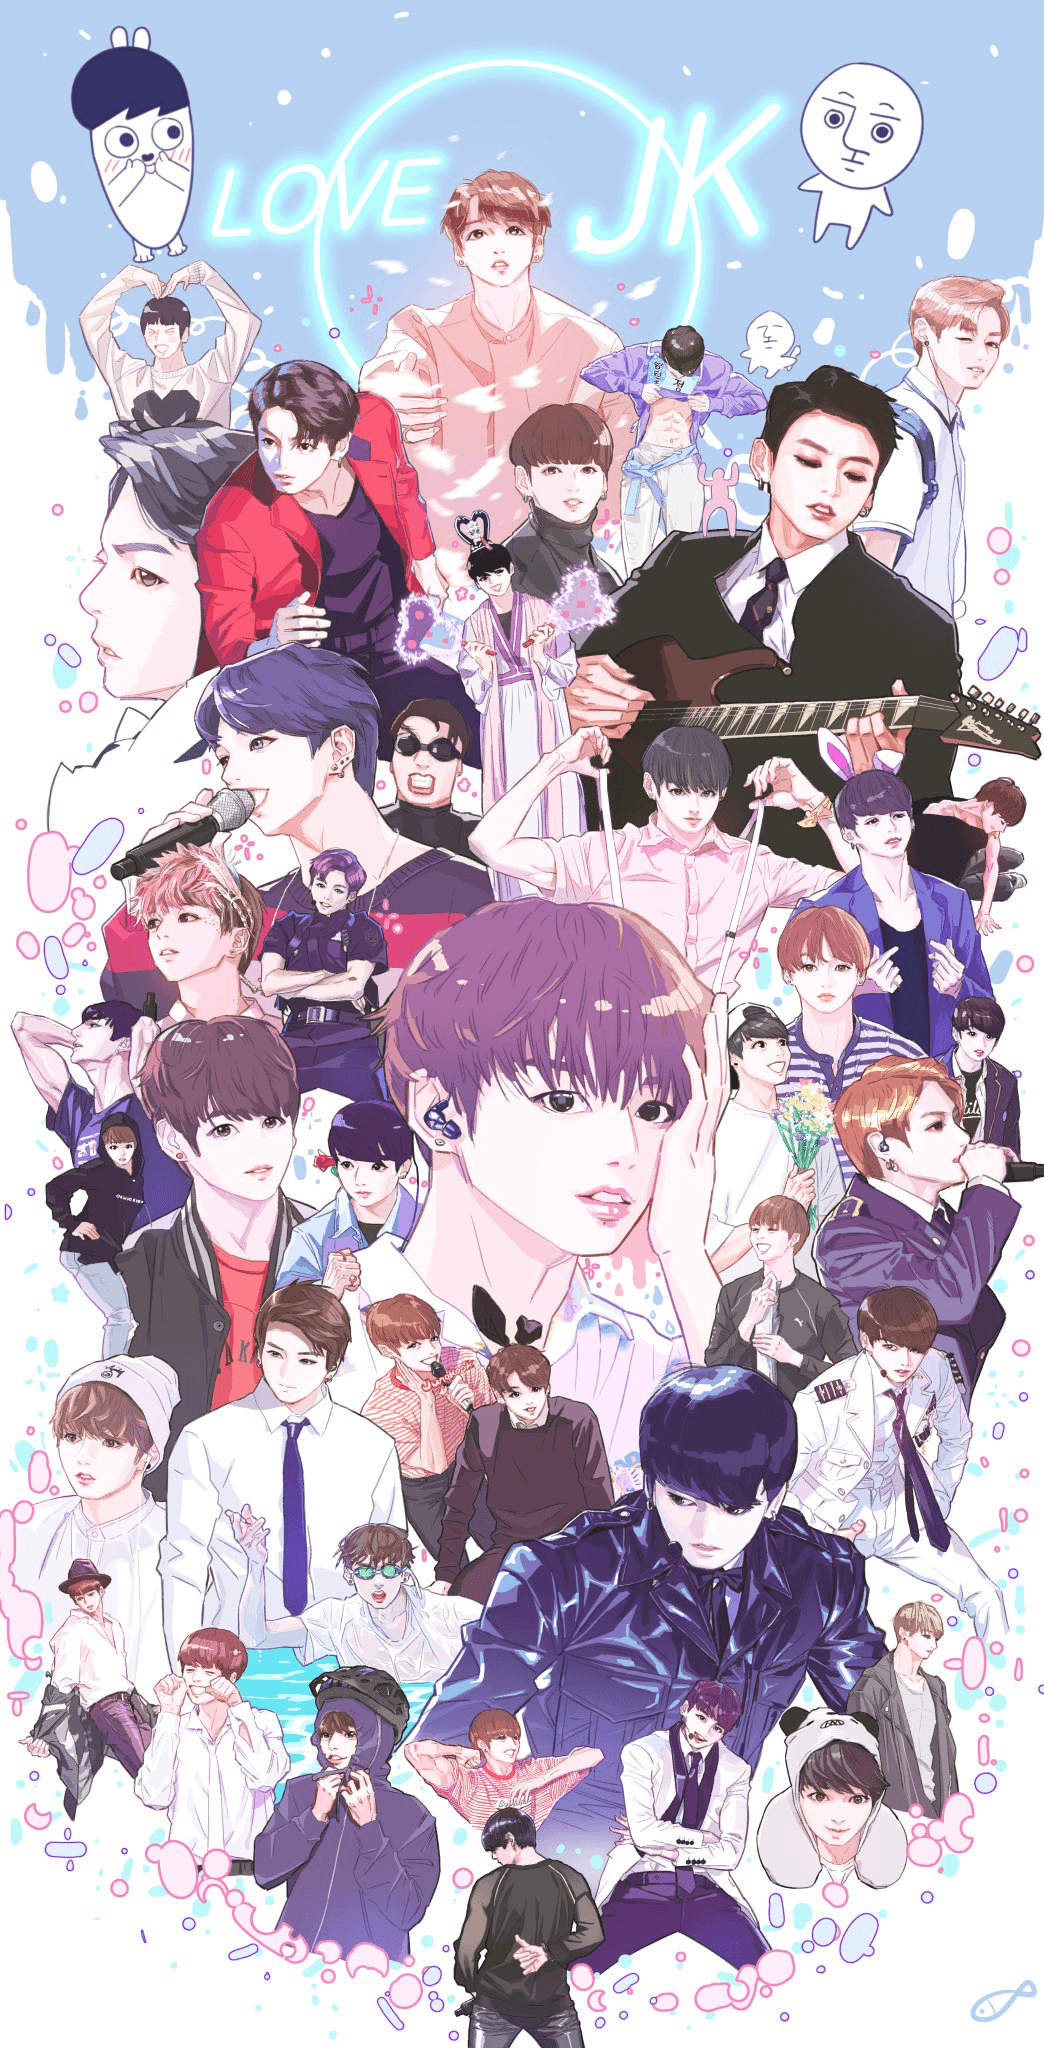 Bts cute anime wallpapers